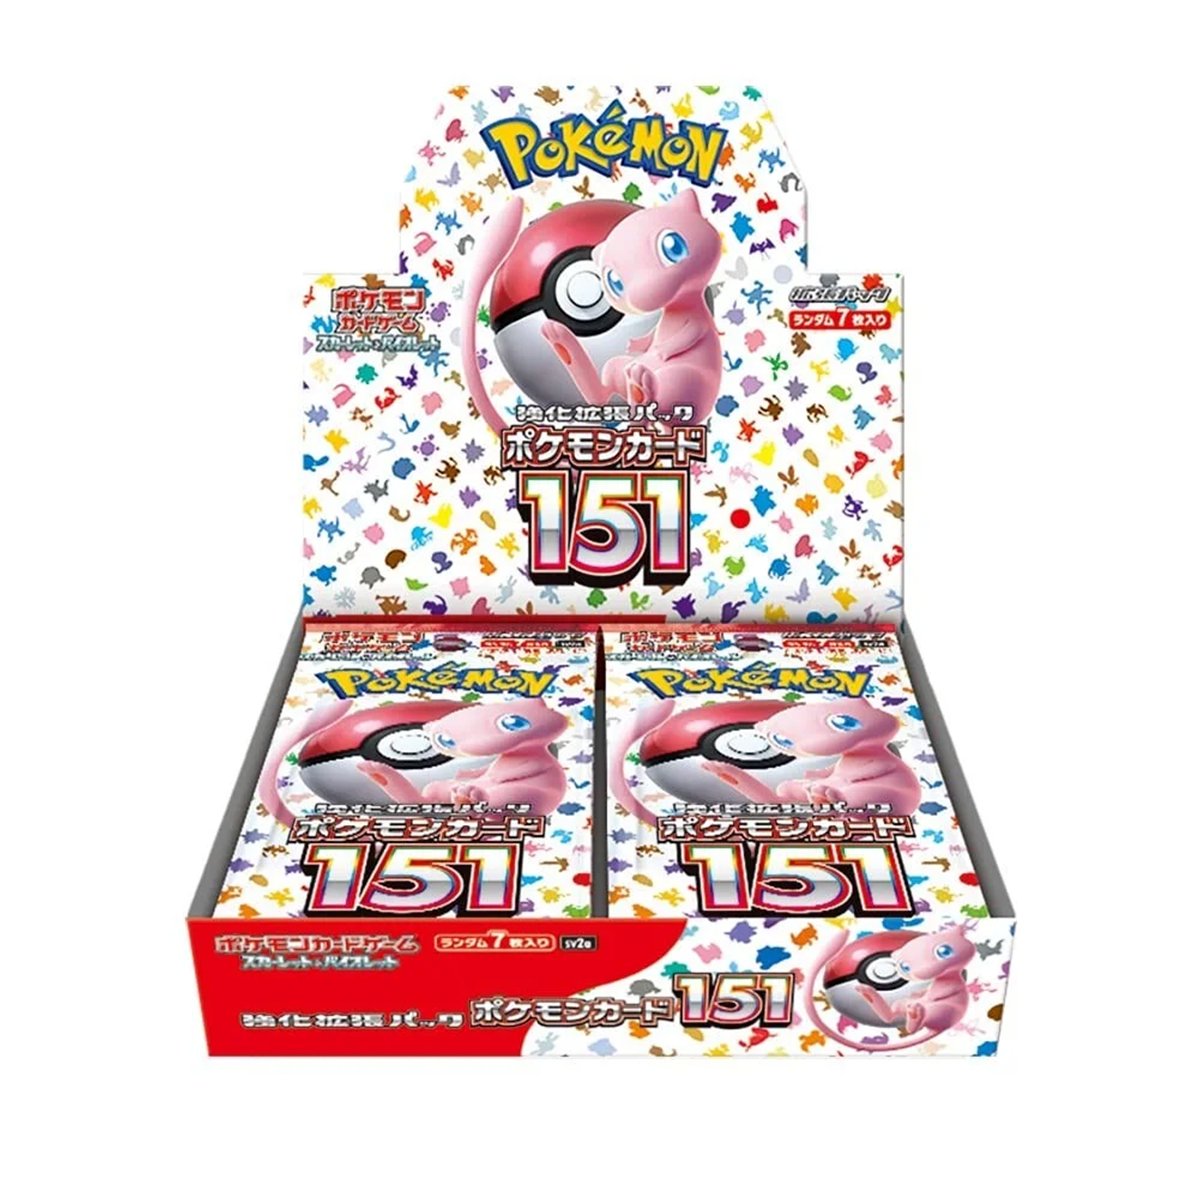 Just-a-Hobby - Scarlet & Violet Enhanced Expansion Pack Pokémon Card 151 Box - $119.99 (Pre-Order) justahobby.store/products/wave-… 5% off code: CELADON #ad Free shipping over $250 Discord: bit.ly/3RvqtET